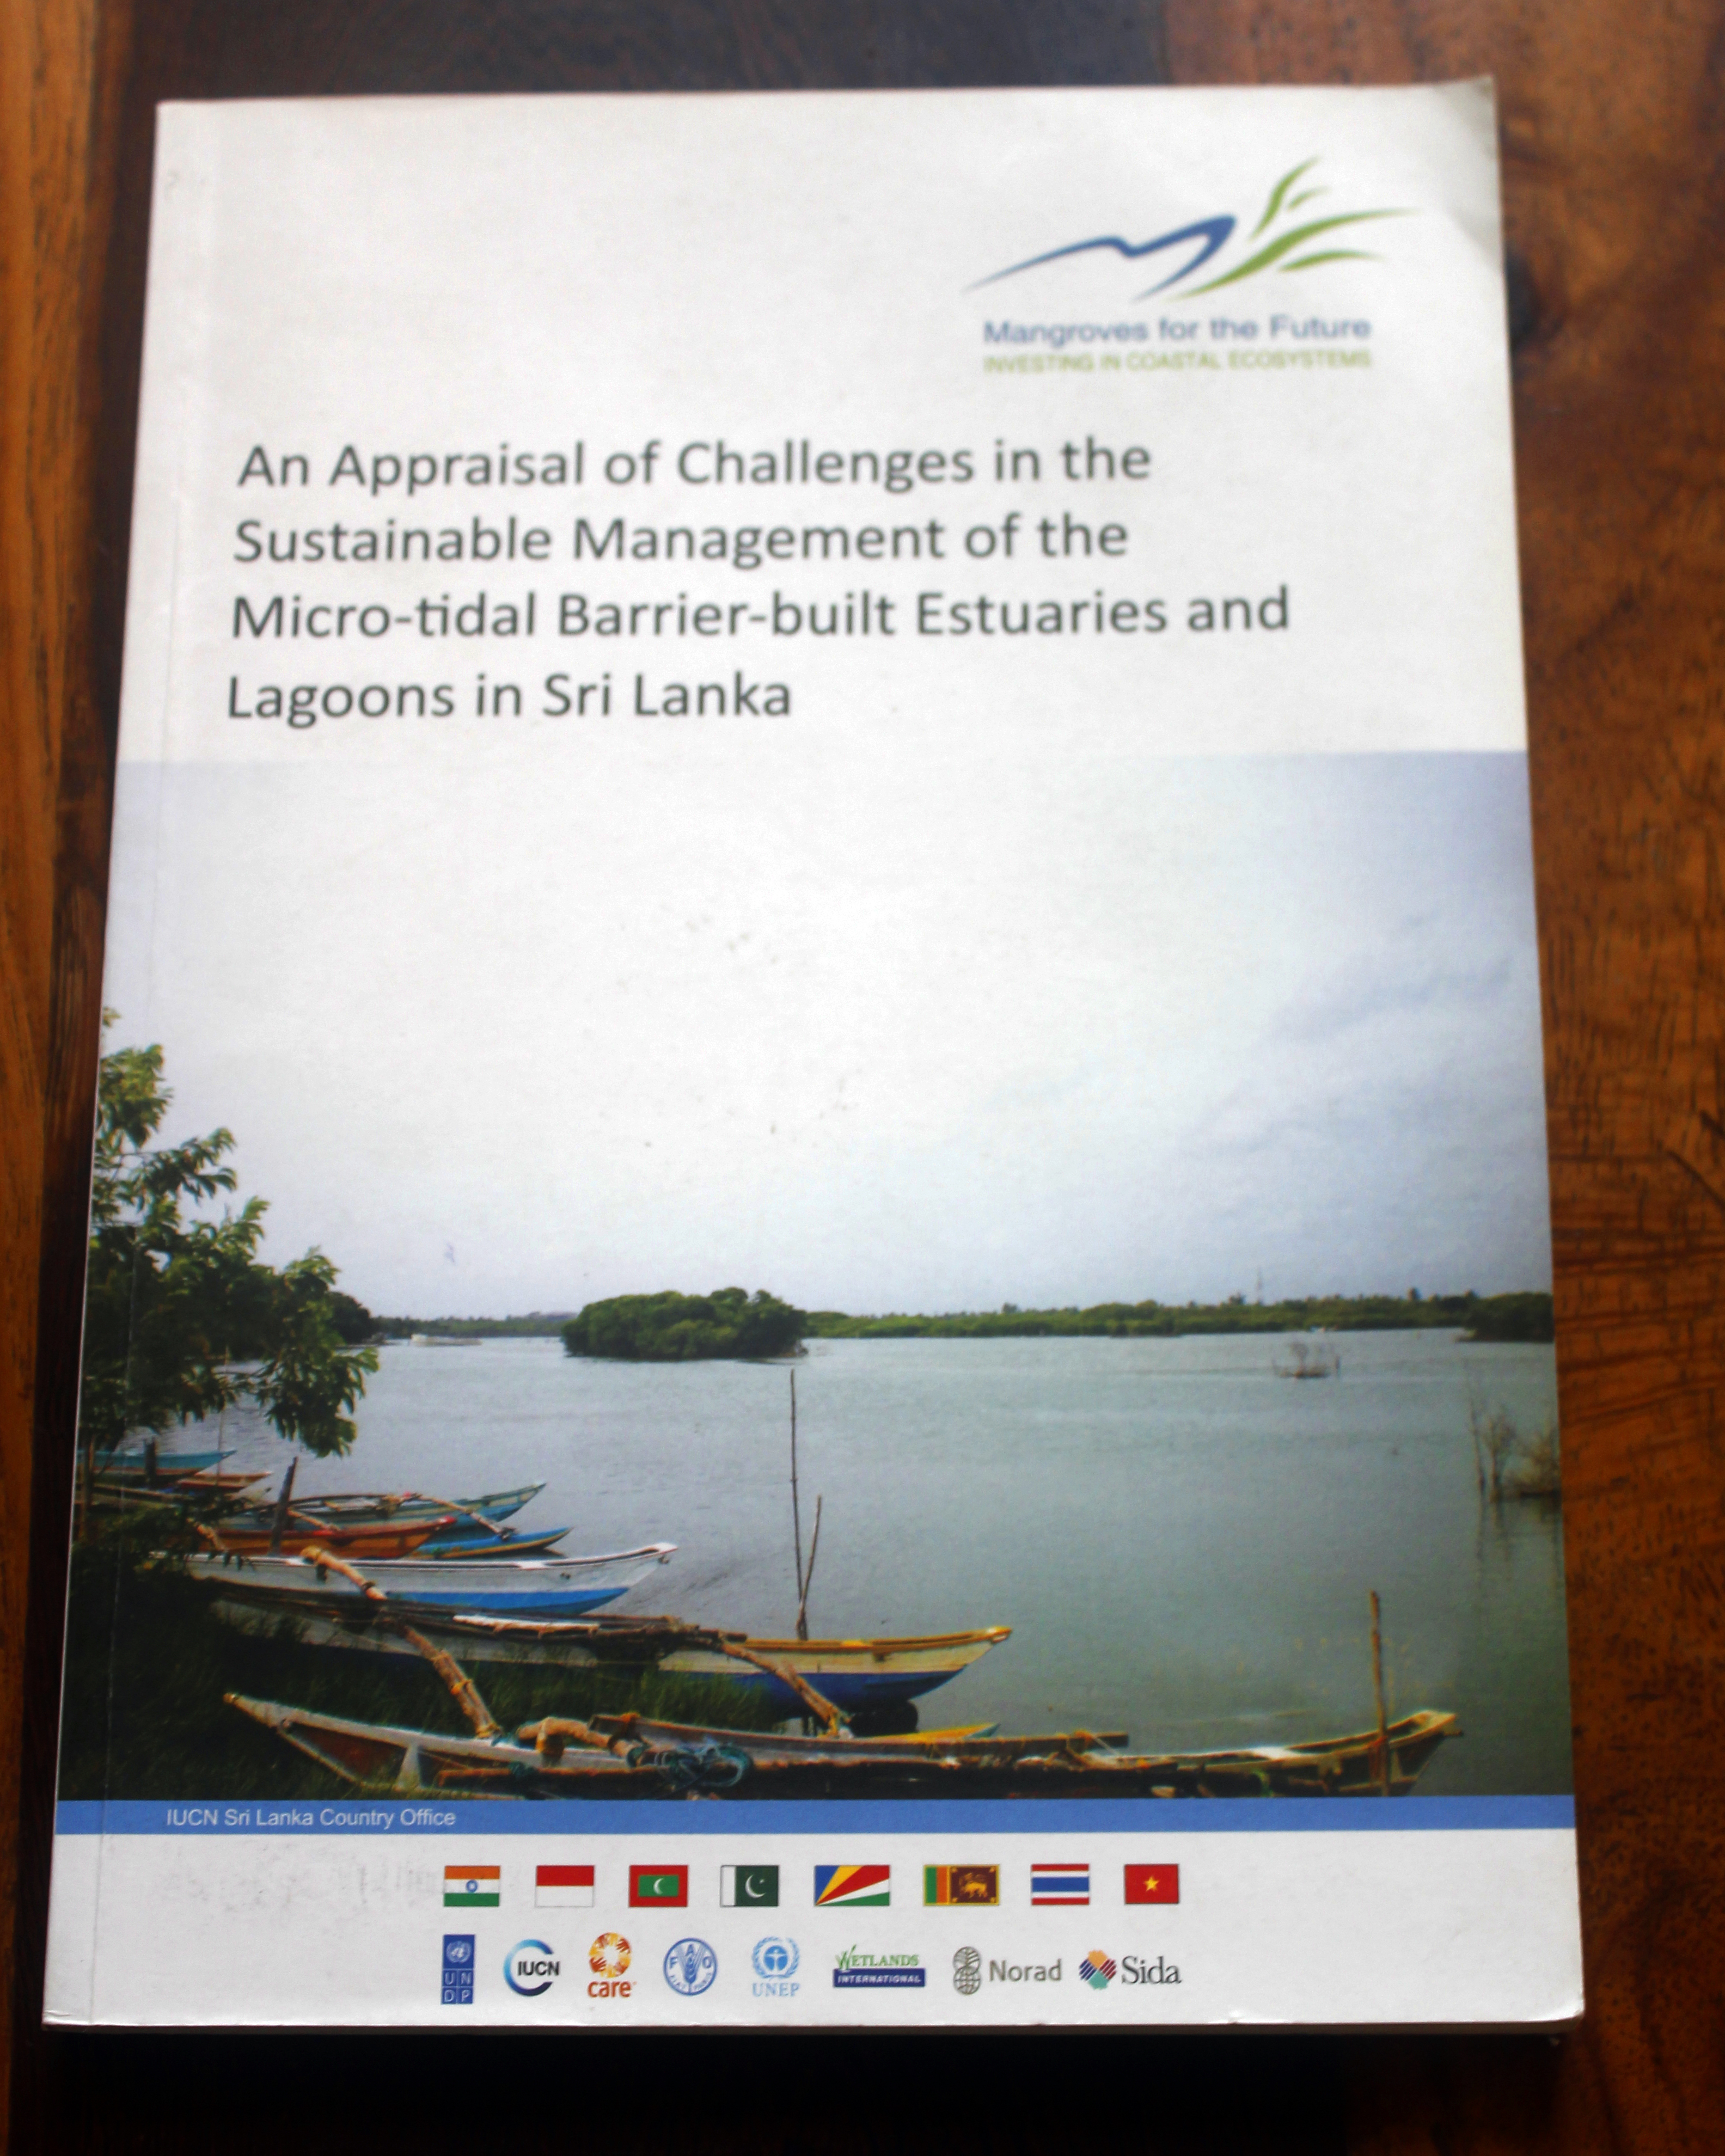 An Appraisal Of Challenges in the Sustainable Management of the Microtidal Barrierbuilt Estuaries and Lagoons in Sri Lanka 